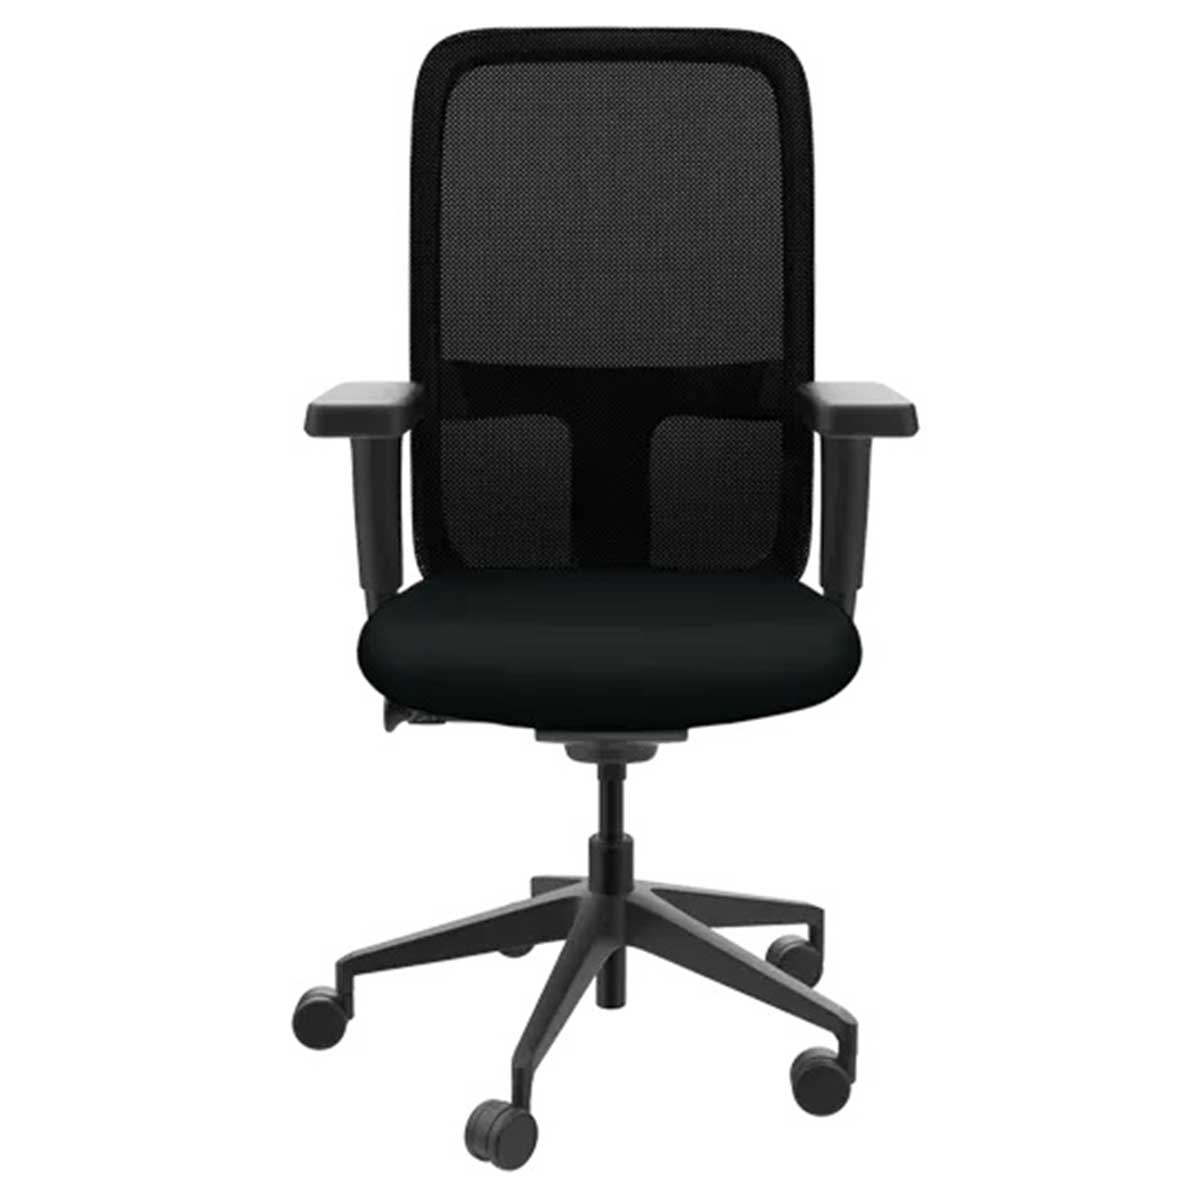 Revolving Chair Manufacturers, Suppliers in Faridabad